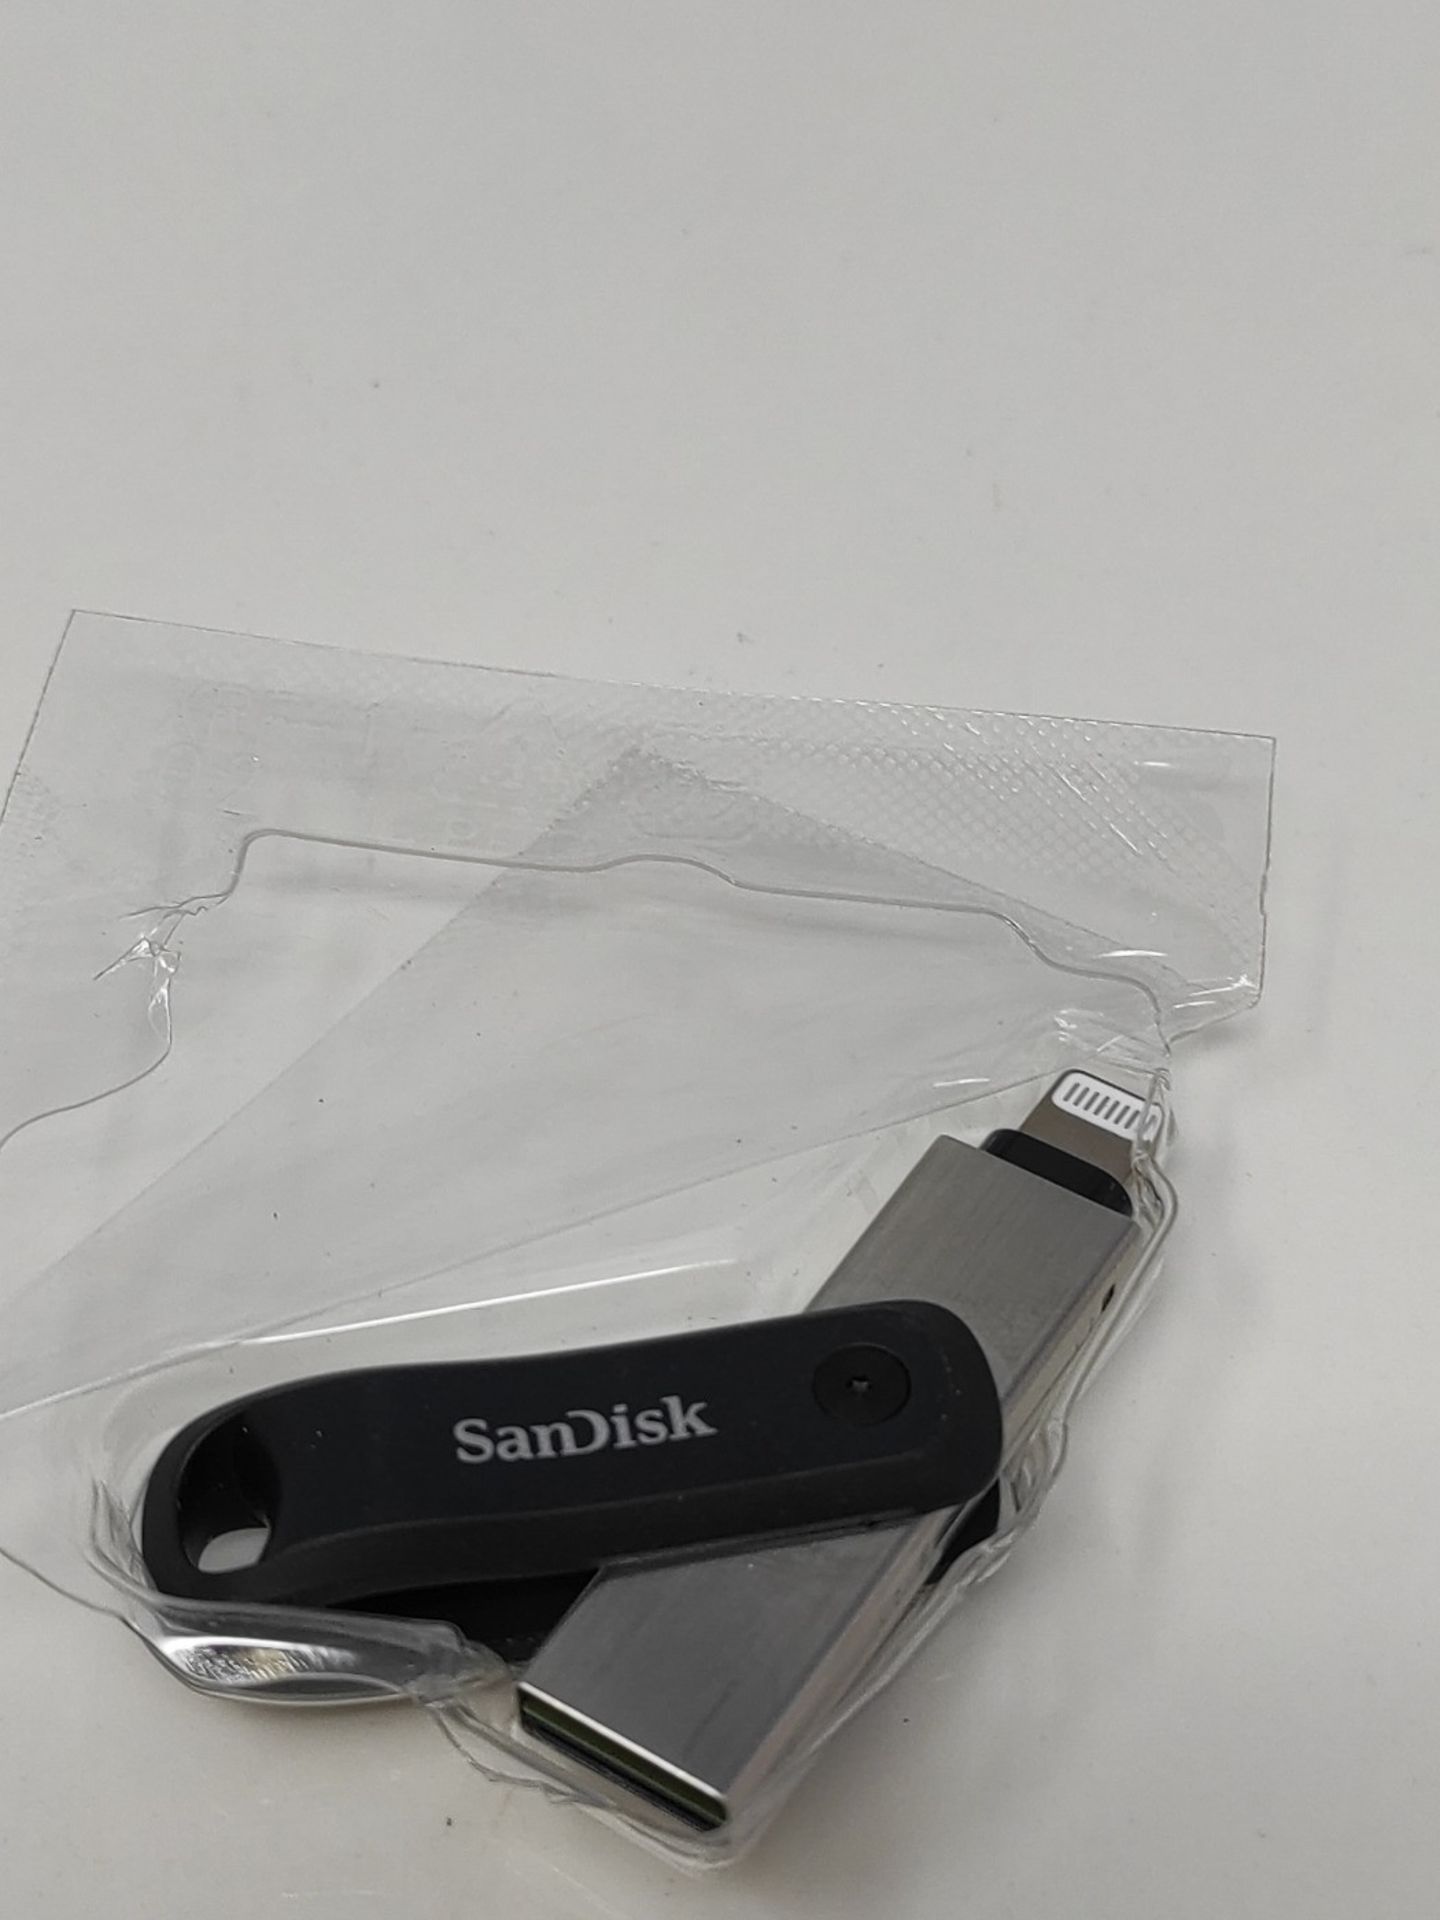 SanDisk iXpand Go 128GB - Dual connector USB drive for backing up iPhone and iPad - Image 2 of 4